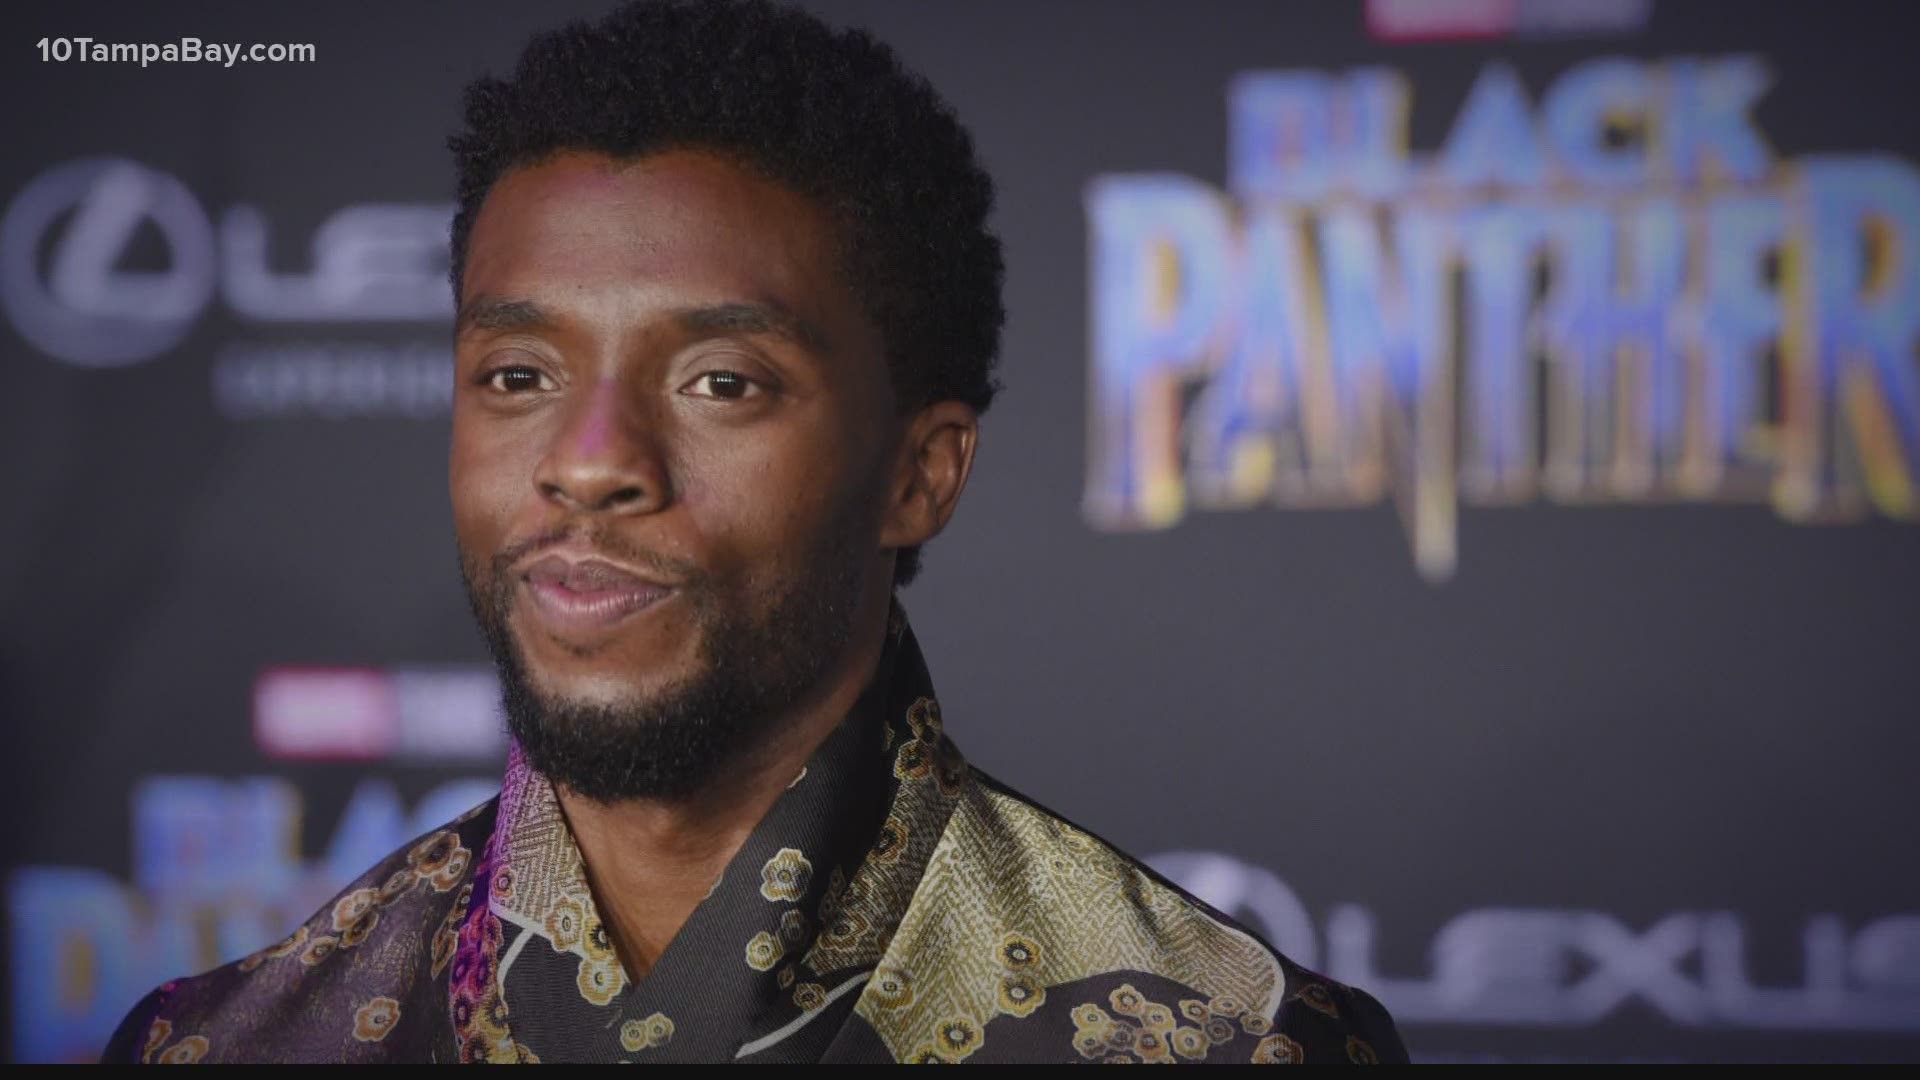 Actor Chadwick Boseman, who played Black icons Jackie Robinson and James Brown before finding fame as the Black Panther, has died of cancer.